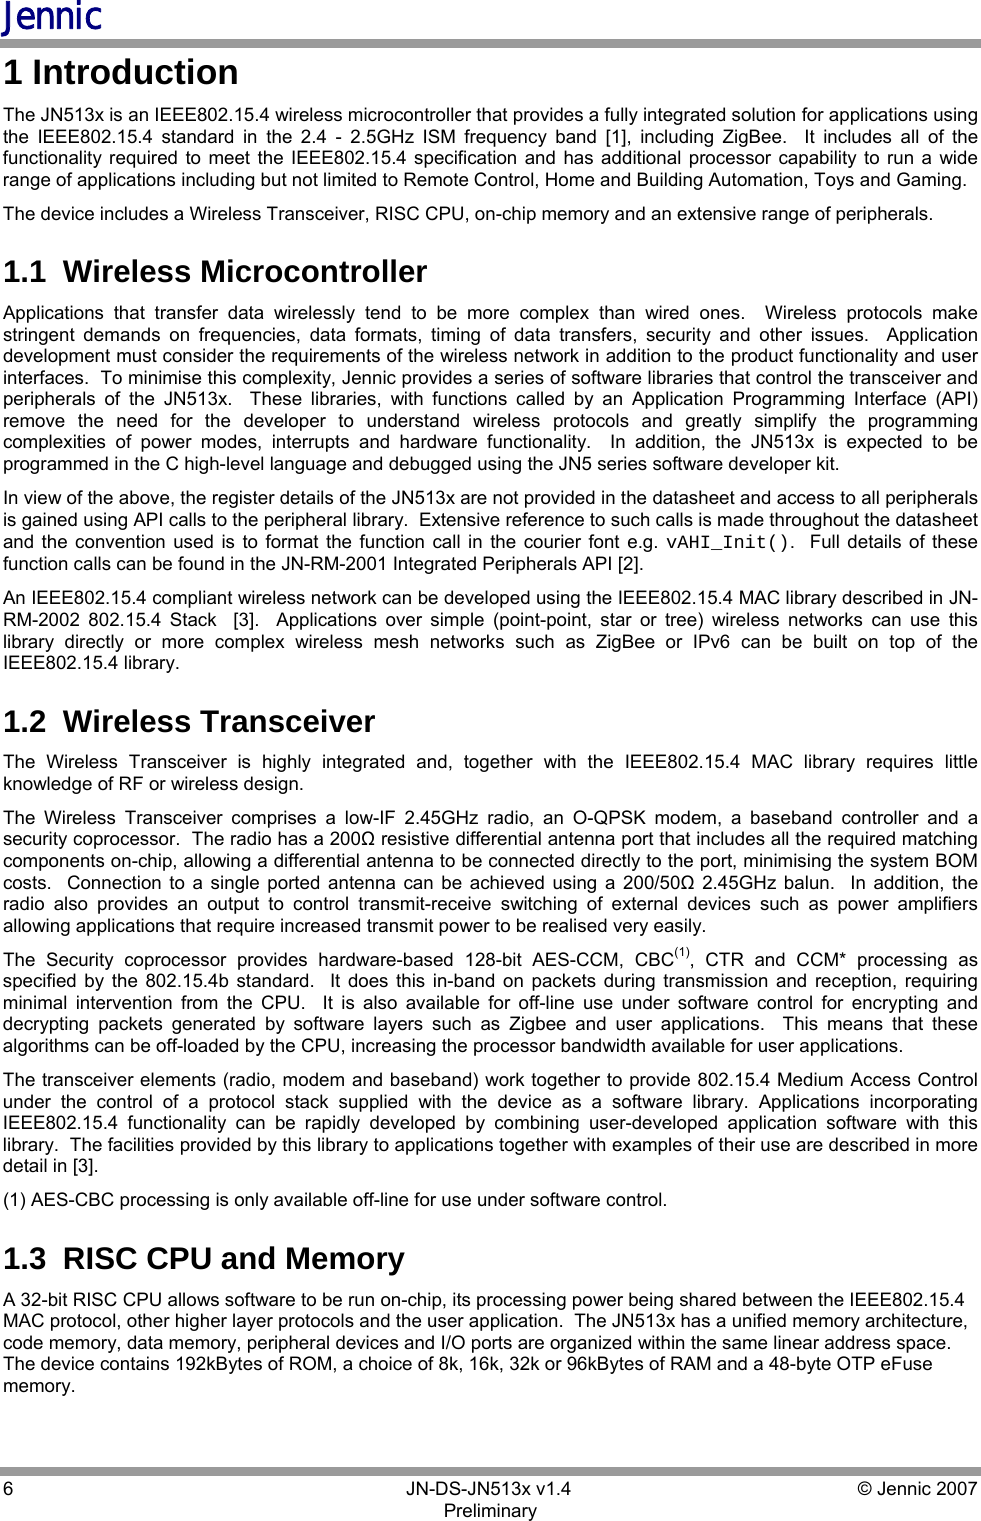 Jennic 6        JN-DS-JN513x v1.4  © Jennic 2007 Preliminary 1 Introduction The JN513x is an IEEE802.15.4 wireless microcontroller that provides a fully integrated solution for applications using the IEEE802.15.4 standard in the 2.4 - 2.5GHz ISM frequency band [1], including ZigBee.  It includes all of the functionality required to meet the IEEE802.15.4 specification and has additional processor capability to run a wide range of applications including but not limited to Remote Control, Home and Building Automation, Toys and Gaming.  The device includes a Wireless Transceiver, RISC CPU, on-chip memory and an extensive range of peripherals. 1.1  Wireless Microcontroller Applications that transfer data wirelessly tend to be more complex than wired ones.  Wireless protocols make stringent demands on frequencies, data formats, timing of data transfers, security and other issues.  Application development must consider the requirements of the wireless network in addition to the product functionality and user interfaces.  To minimise this complexity, Jennic provides a series of software libraries that control the transceiver and peripherals of the JN513x.  These libraries, with functions called by an Application Programming Interface (API) remove the need for the developer to understand wireless protocols and greatly simplify the programming complexities of power modes, interrupts and hardware functionality.  In addition, the JN513x is expected to be programmed in the C high-level language and debugged using the JN5 series software developer kit. In view of the above, the register details of the JN513x are not provided in the datasheet and access to all peripherals is gained using API calls to the peripheral library.  Extensive reference to such calls is made throughout the datasheet and the convention used is to format the function call in the courier font e.g. vAHI_Init().  Full details of these function calls can be found in the JN-RM-2001 Integrated Peripherals API [2]. An IEEE802.15.4 compliant wireless network can be developed using the IEEE802.15.4 MAC library described in JN-RM-2002 802.15.4 Stack  [3].  Applications over simple (point-point, star or tree) wireless networks can use this library directly or more complex wireless mesh networks such as ZigBee or IPv6 can be built on top of the IEEE802.15.4 library. 1.2  Wireless Transceiver  The Wireless Transceiver is highly integrated and, together with the IEEE802.15.4 MAC library requires little knowledge of RF or wireless design. The Wireless Transceiver comprises a low-IF 2.45GHz radio, an O-QPSK modem, a baseband controller and a security coprocessor.  The radio has a 200Ω resistive differential antenna port that includes all the required matching components on-chip, allowing a differential antenna to be connected directly to the port, minimising the system BOM costs.  Connection to a single ported antenna can be achieved using a 200/50Ω 2.45GHz balun.  In addition, the radio also provides an output to control transmit-receive switching of external devices such as power amplifiers allowing applications that require increased transmit power to be realised very easily. The Security coprocessor provides hardware-based 128-bit AES-CCM, CBC(1), CTR and CCM* processing as specified by the 802.15.4b standard.  It does this in-band on packets during transmission and reception, requiring minimal intervention from the CPU.  It is also available for off-line use under software control for encrypting and decrypting packets generated by software layers such as Zigbee and user applications.  This means that these algorithms can be off-loaded by the CPU, increasing the processor bandwidth available for user applications. The transceiver elements (radio, modem and baseband) work together to provide 802.15.4 Medium Access Control under the control of a protocol stack supplied with the device as a software library. Applications incorporating IEEE802.15.4 functionality can be rapidly developed by combining user-developed application software with this library.  The facilities provided by this library to applications together with examples of their use are described in more detail in [3]. (1) AES-CBC processing is only available off-line for use under software control. 1.3  RISC CPU and Memory A 32-bit RISC CPU allows software to be run on-chip, its processing power being shared between the IEEE802.15.4 MAC protocol, other higher layer protocols and the user application.  The JN513x has a unified memory architecture, code memory, data memory, peripheral devices and I/O ports are organized within the same linear address space.  The device contains 192kBytes of ROM, a choice of 8k, 16k, 32k or 96kBytes of RAM and a 48-byte OTP eFuse memory.  